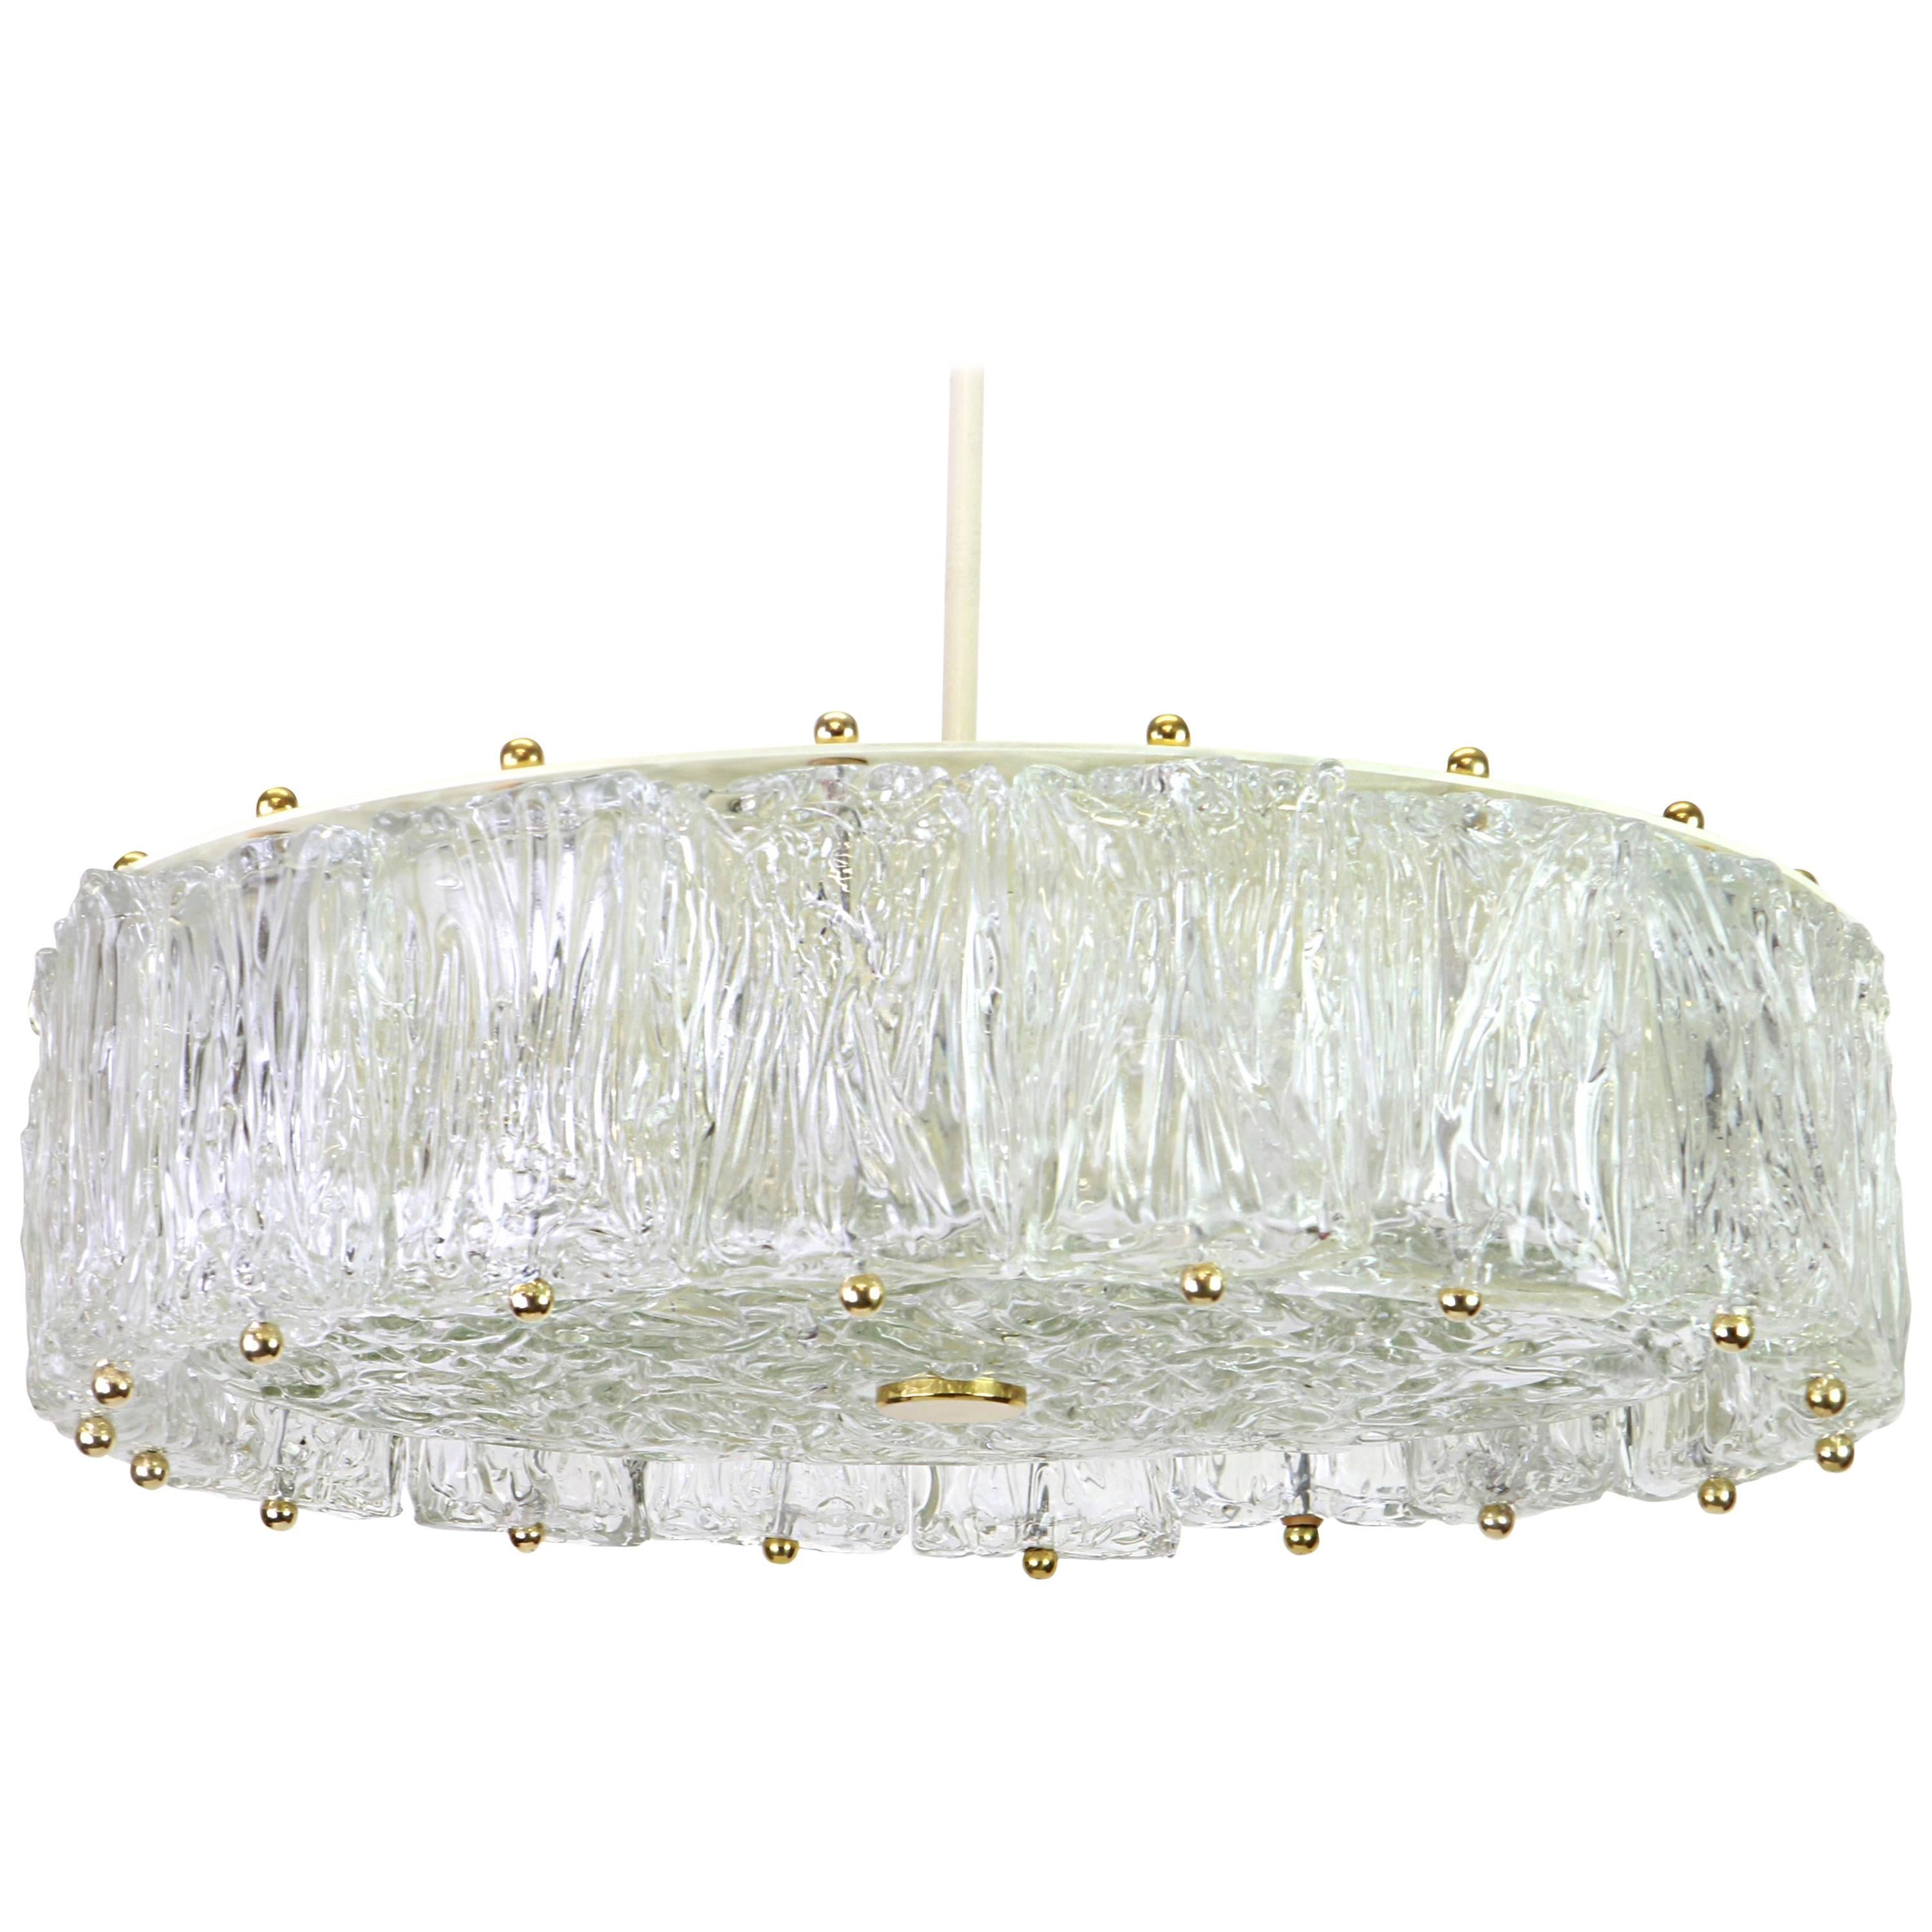 Midcentury Murano Glass Chandelier by Barovier & Toso, Italy, 1960s